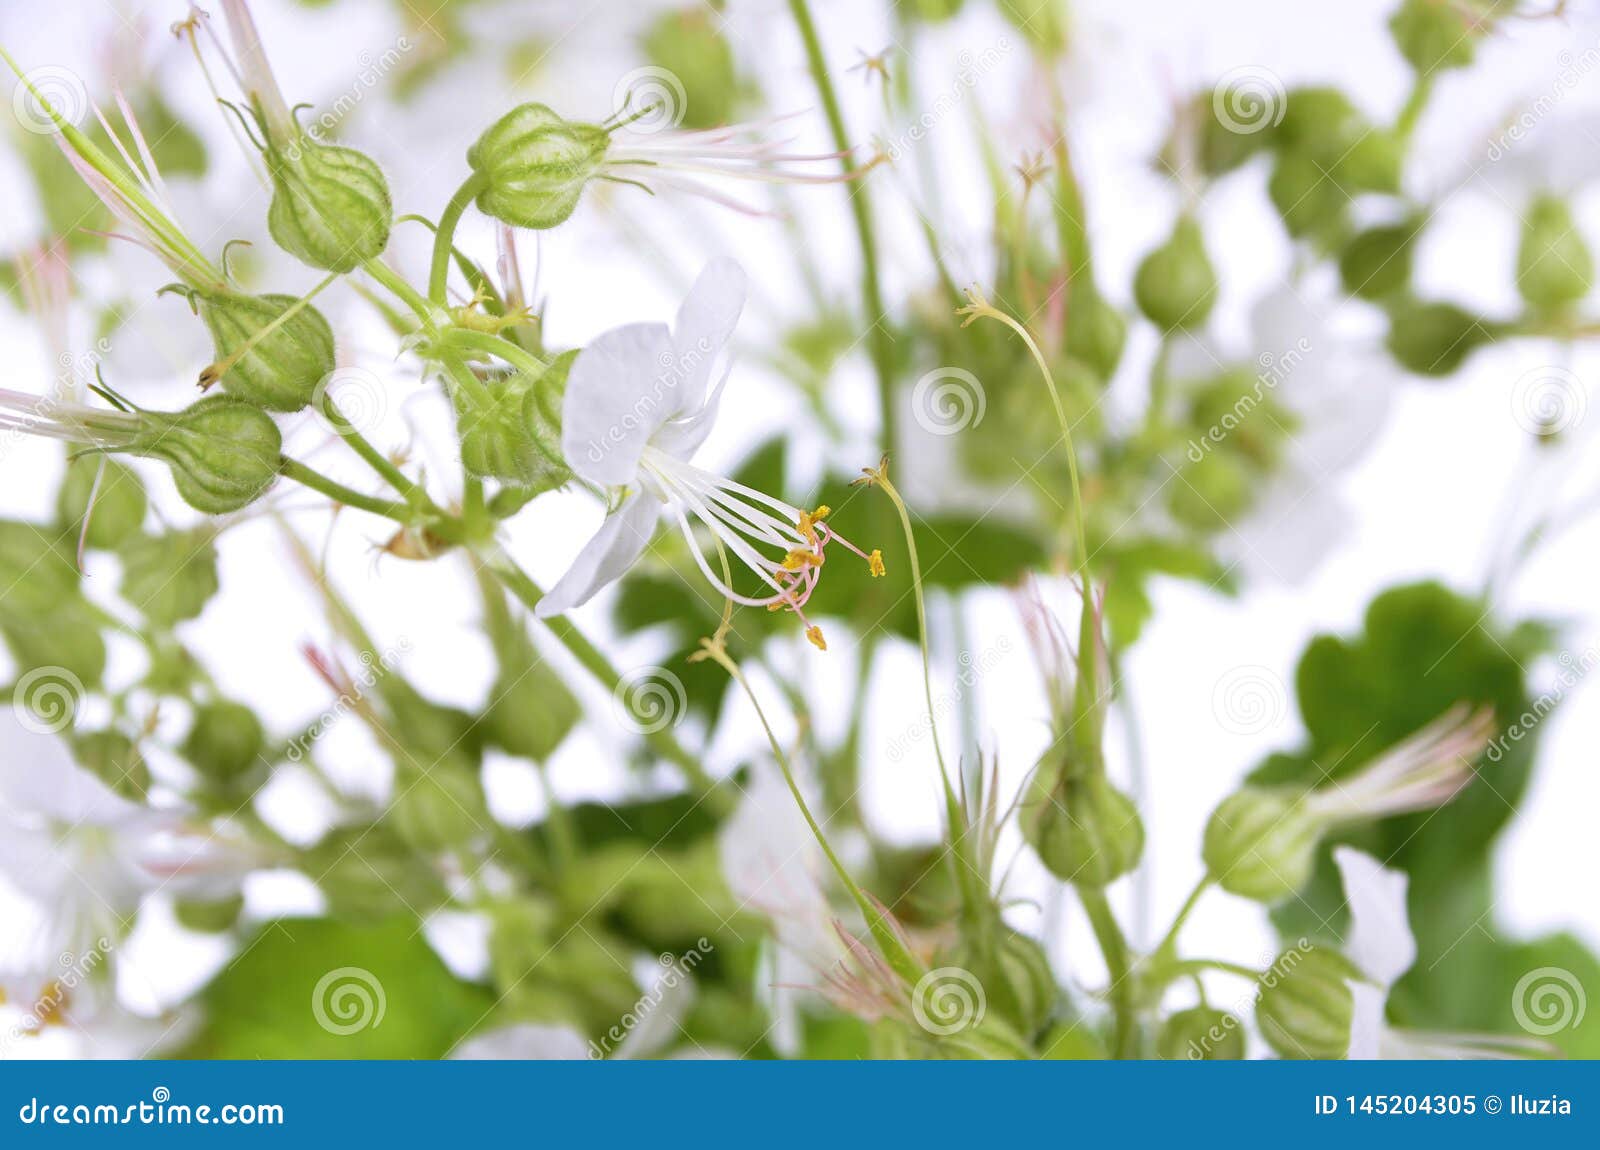 Close Up Of White Bigroot Geranium Flowers On An Isolated White Background Stock Image Image Of Beautiful Outdoors 145204305